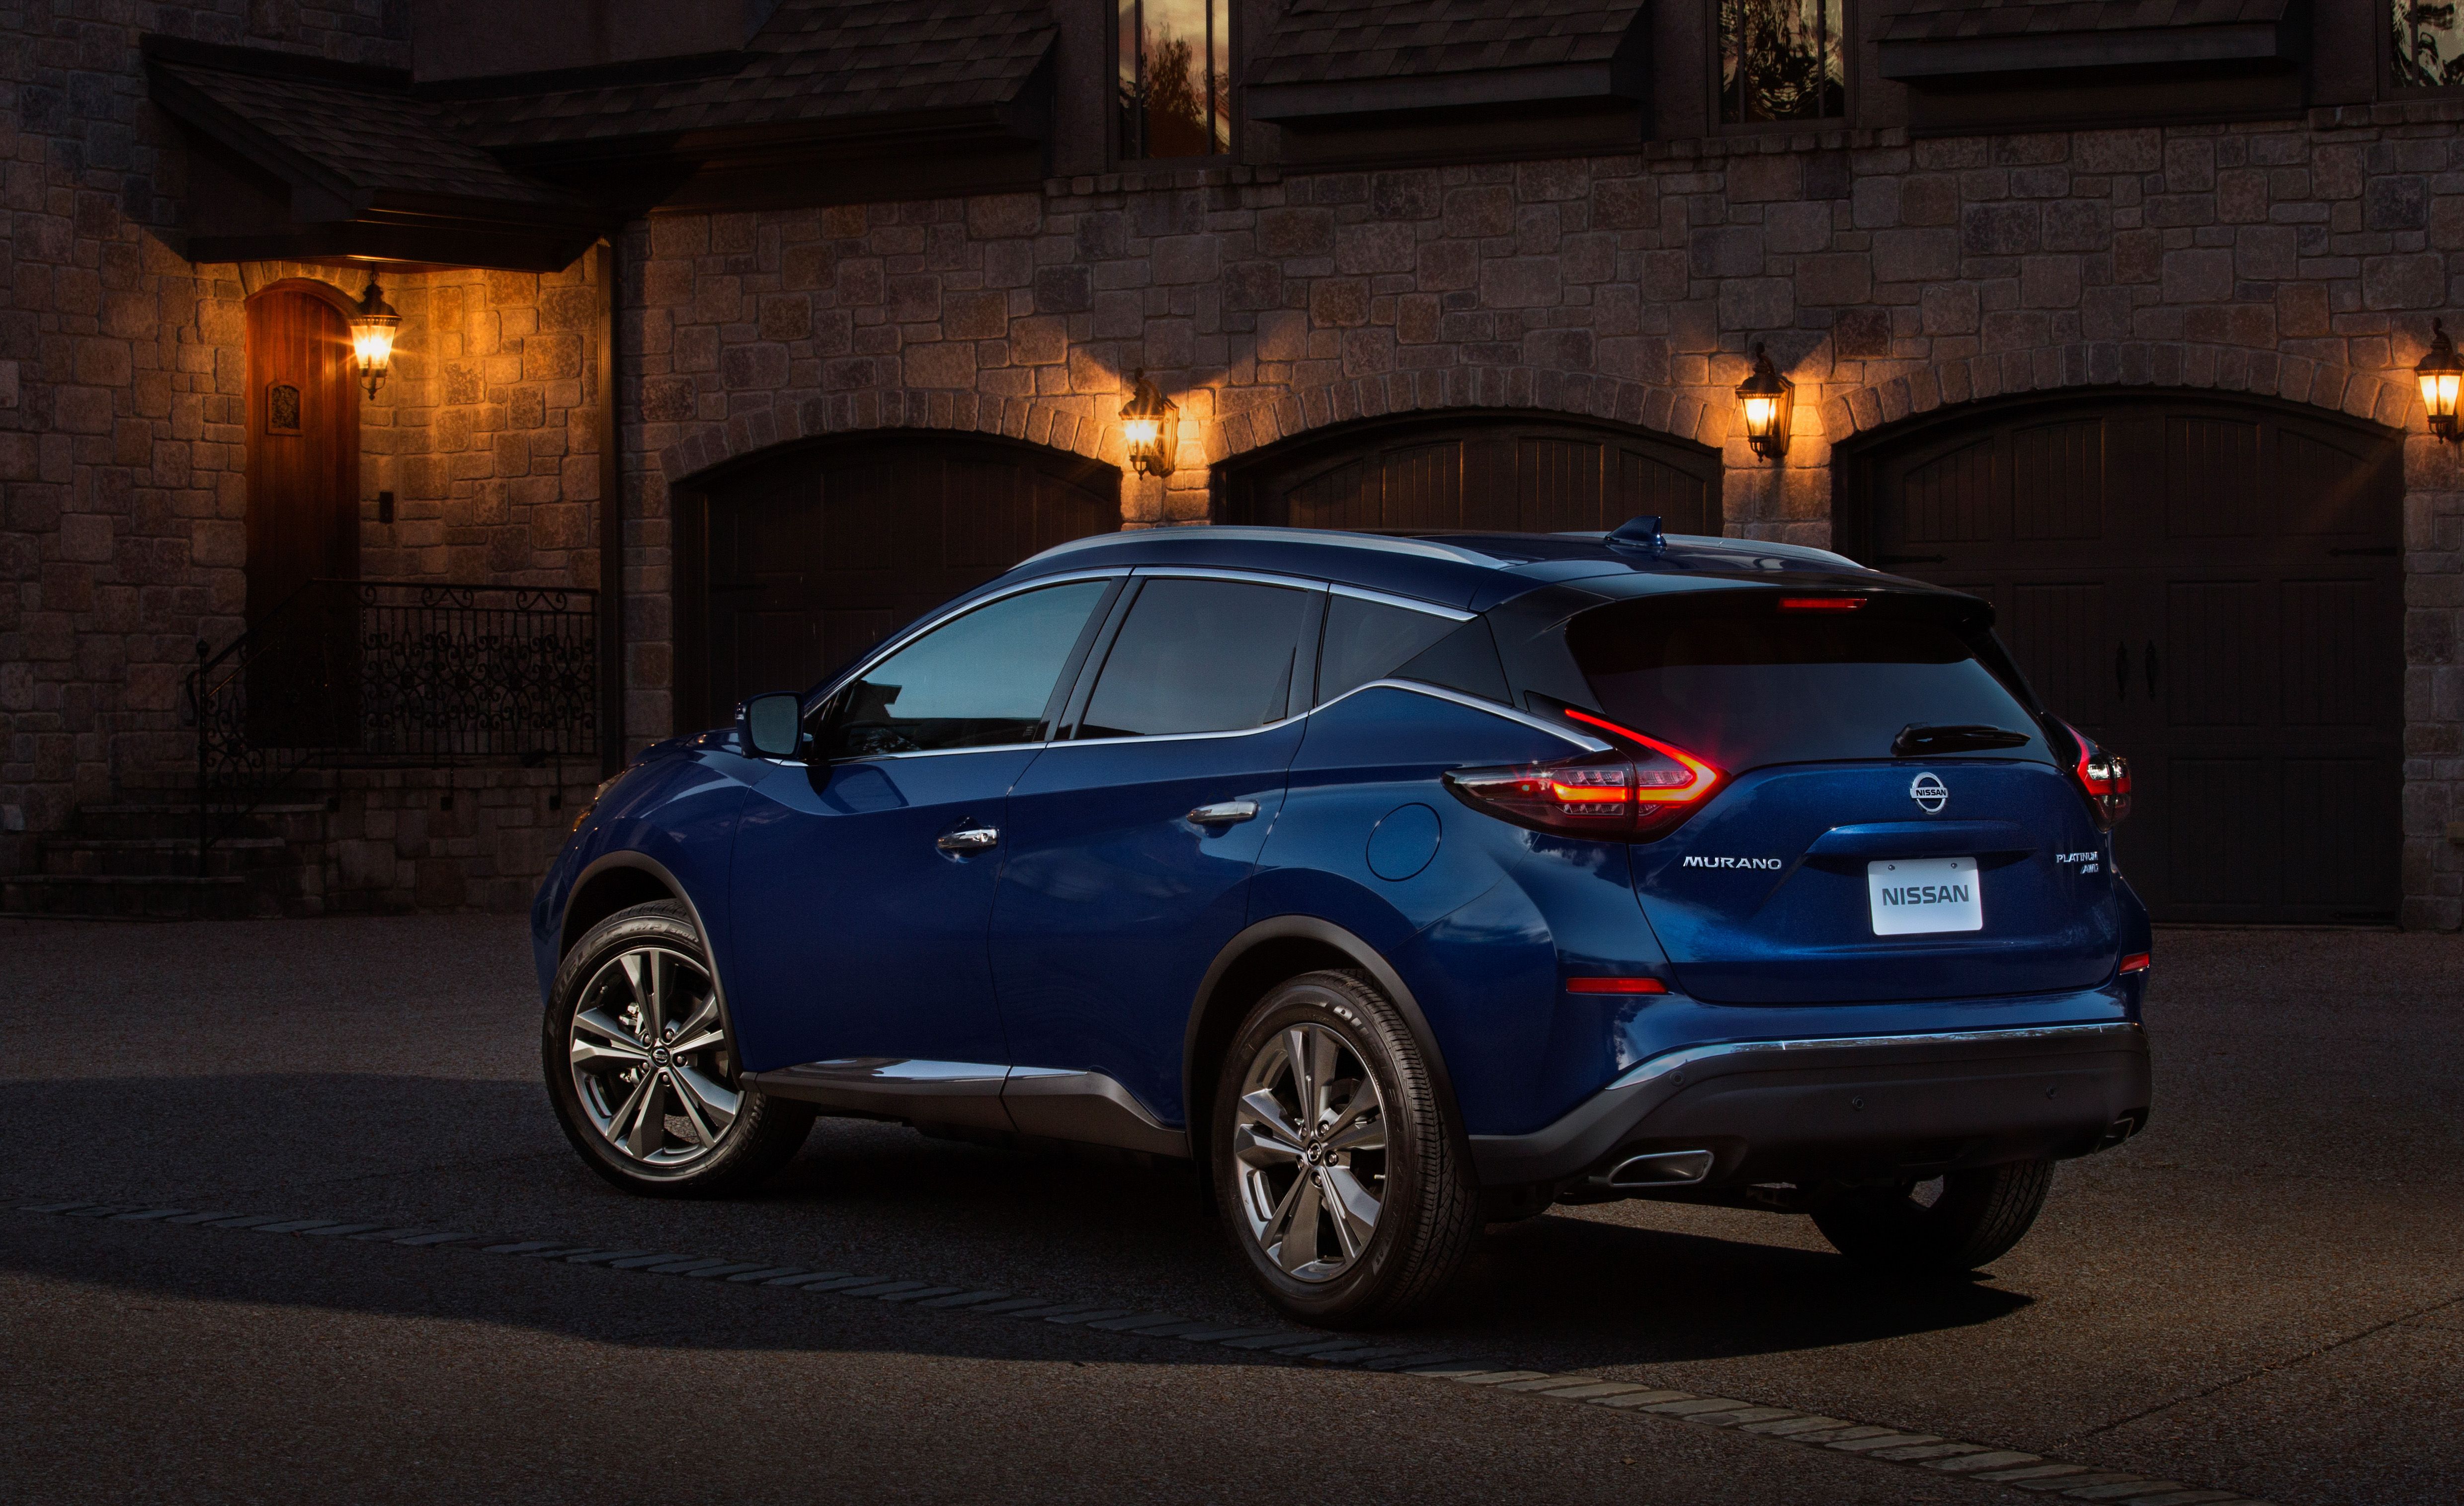 2022 Nissan Murano Review, Pricing, and Specs